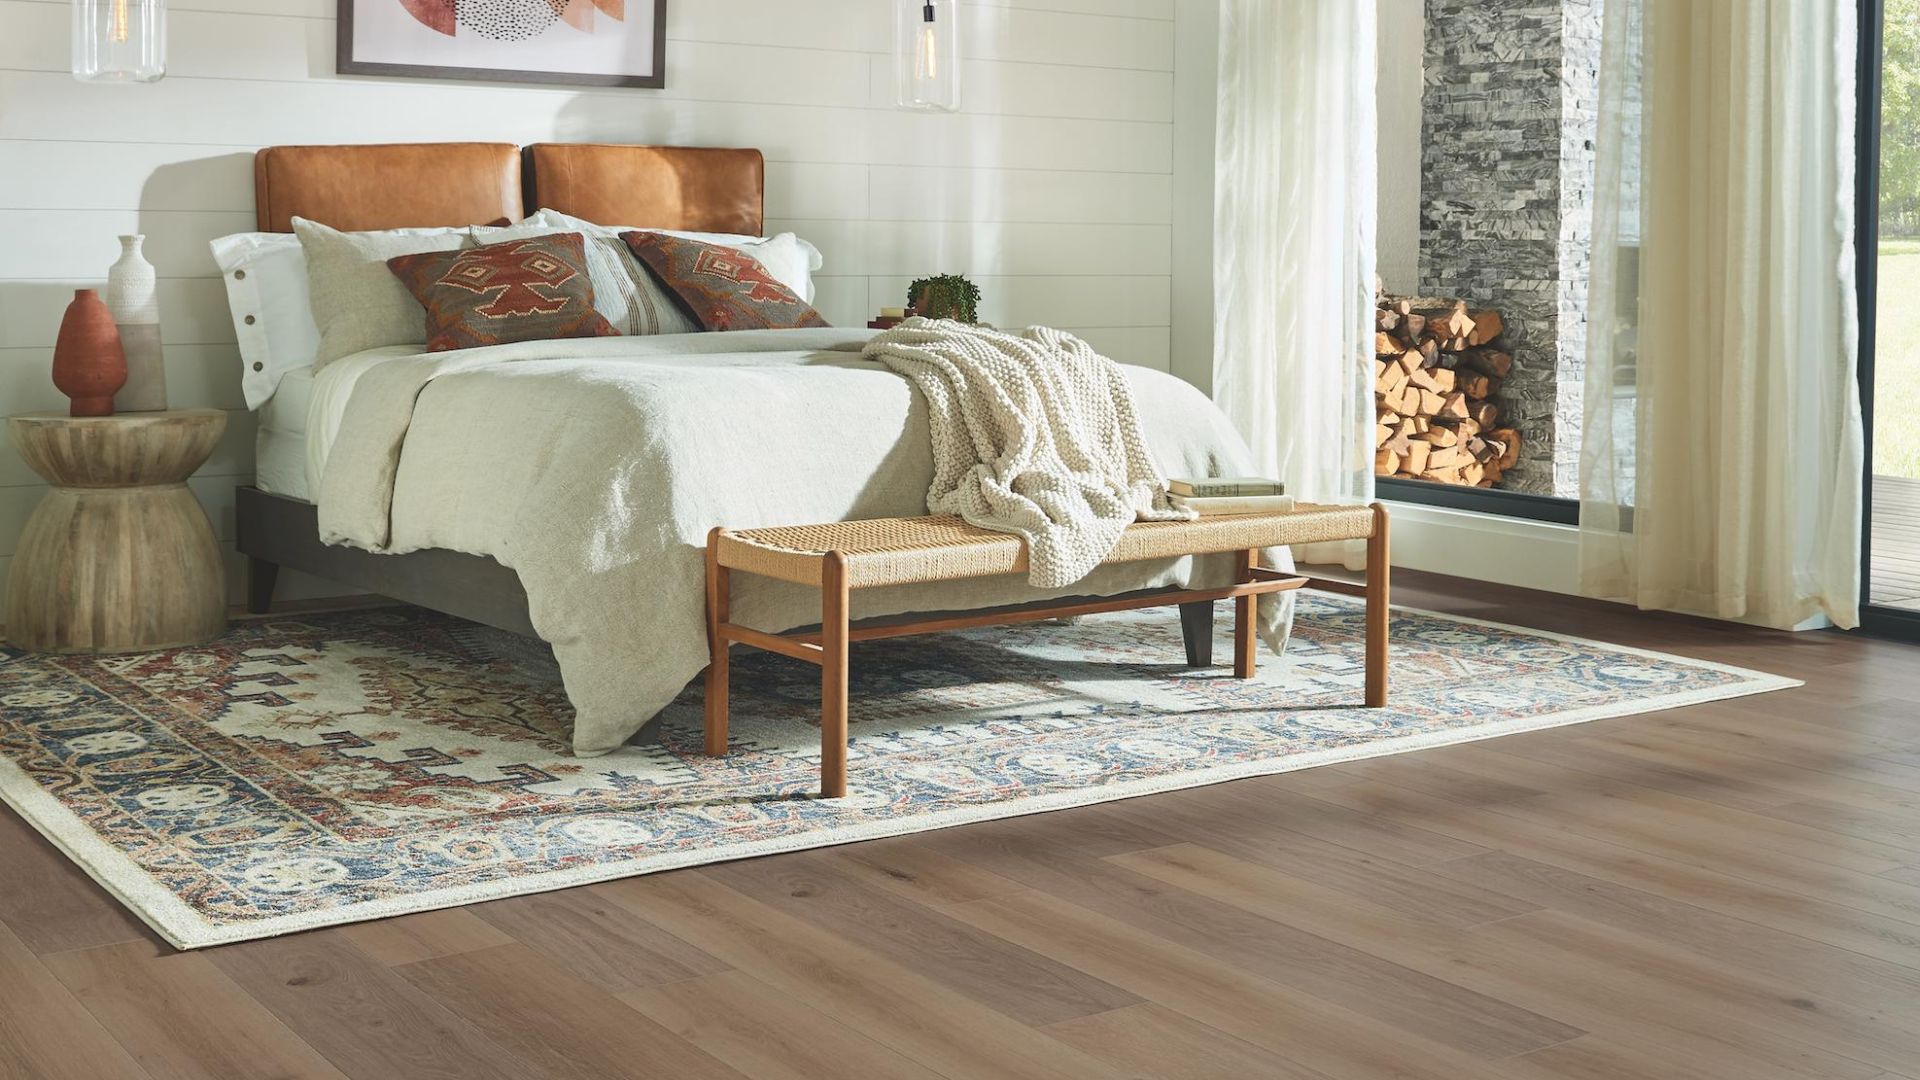 patterned area rug underneath a bed in a large bedroom with wood look laminate flooring